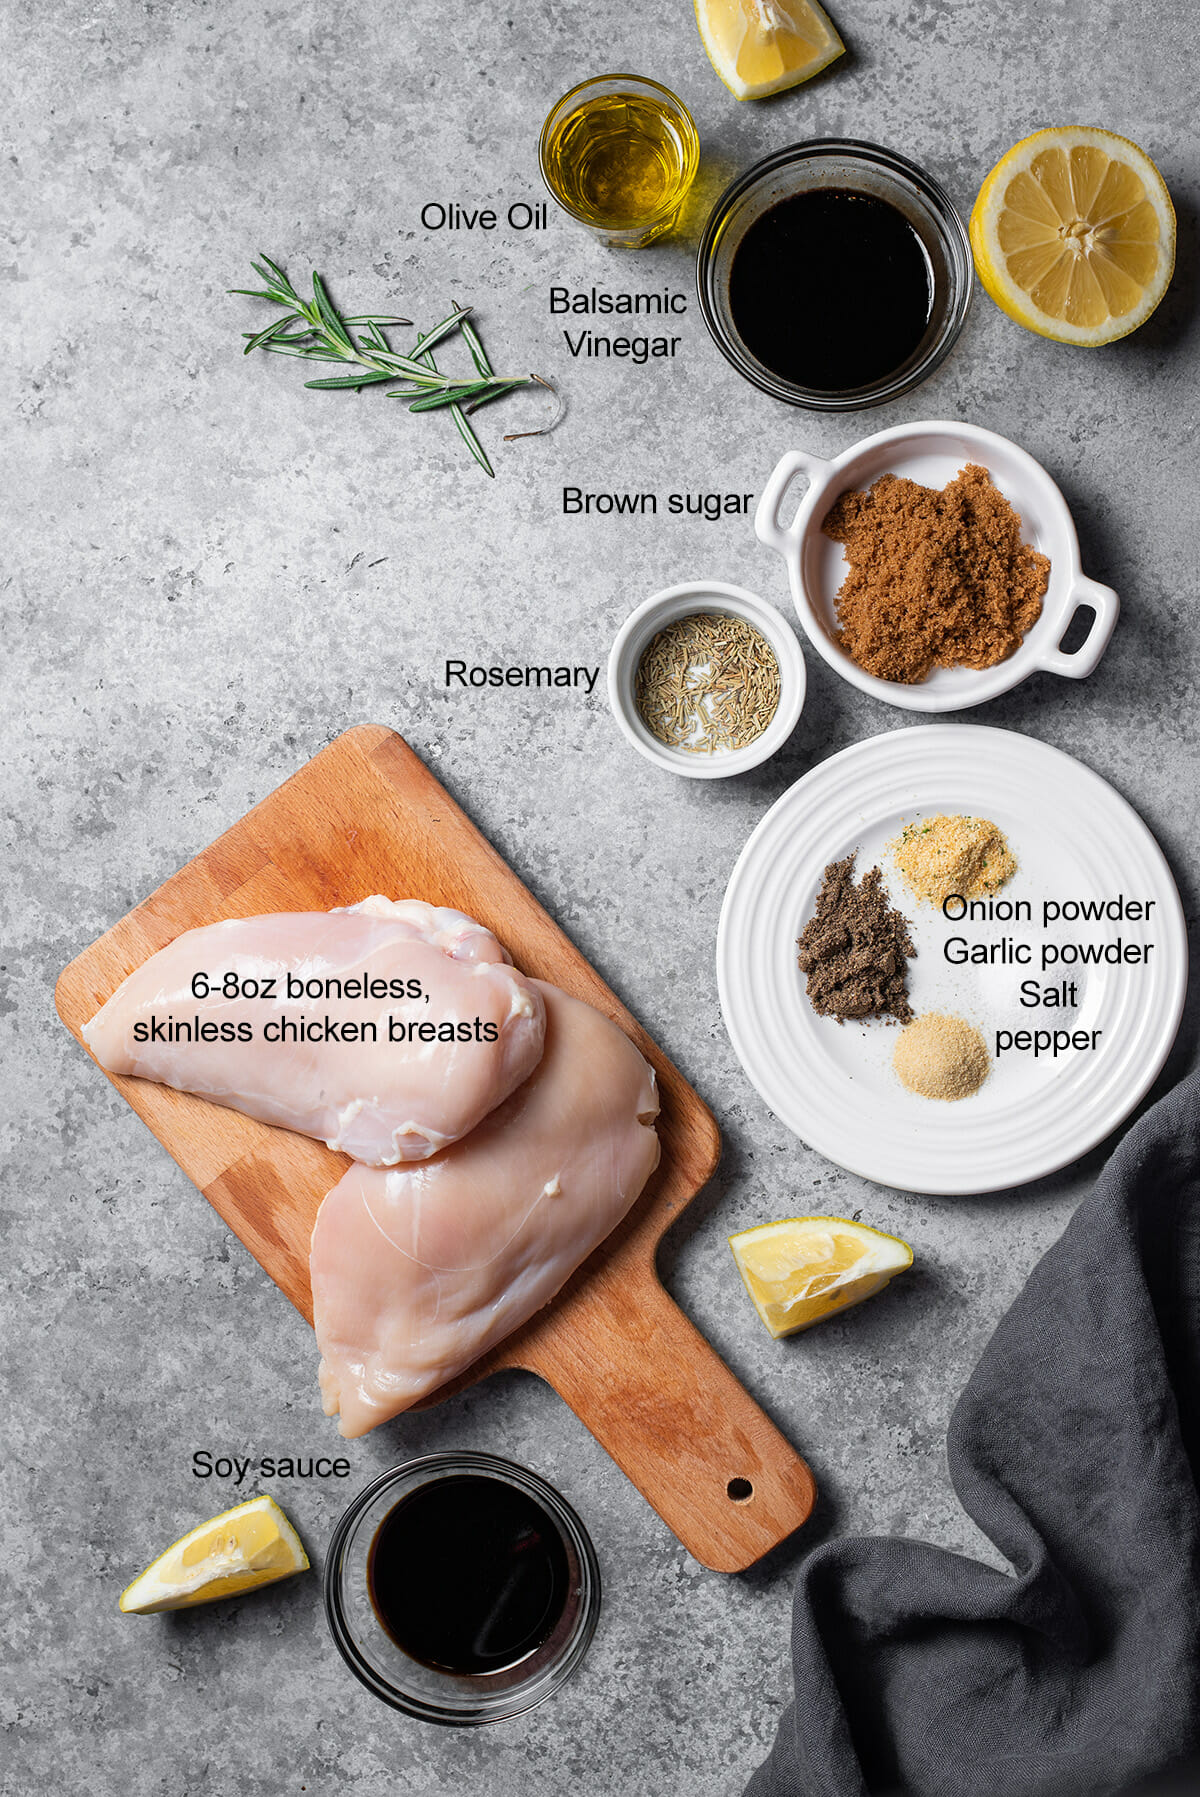 All the ingredients for air fryer chicken breasts